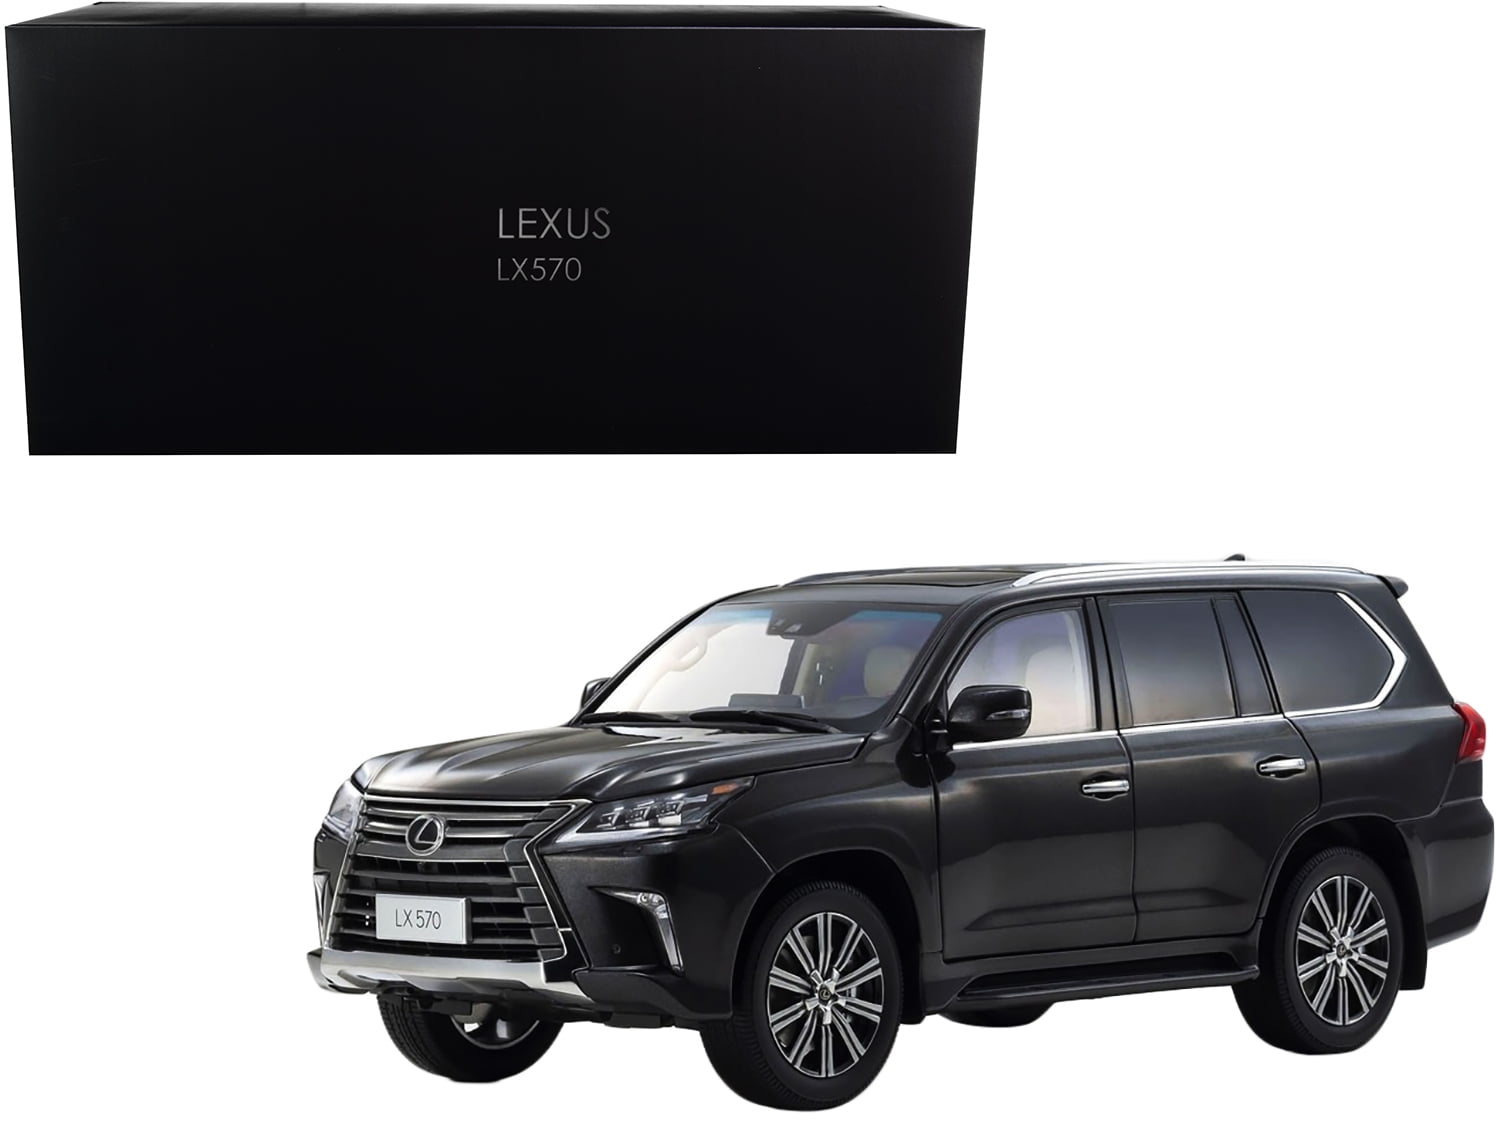 Details about   Kyosho 1/18 Toyota Lexus LX570 Diecast Car Model Gifts Collection Black:Silver